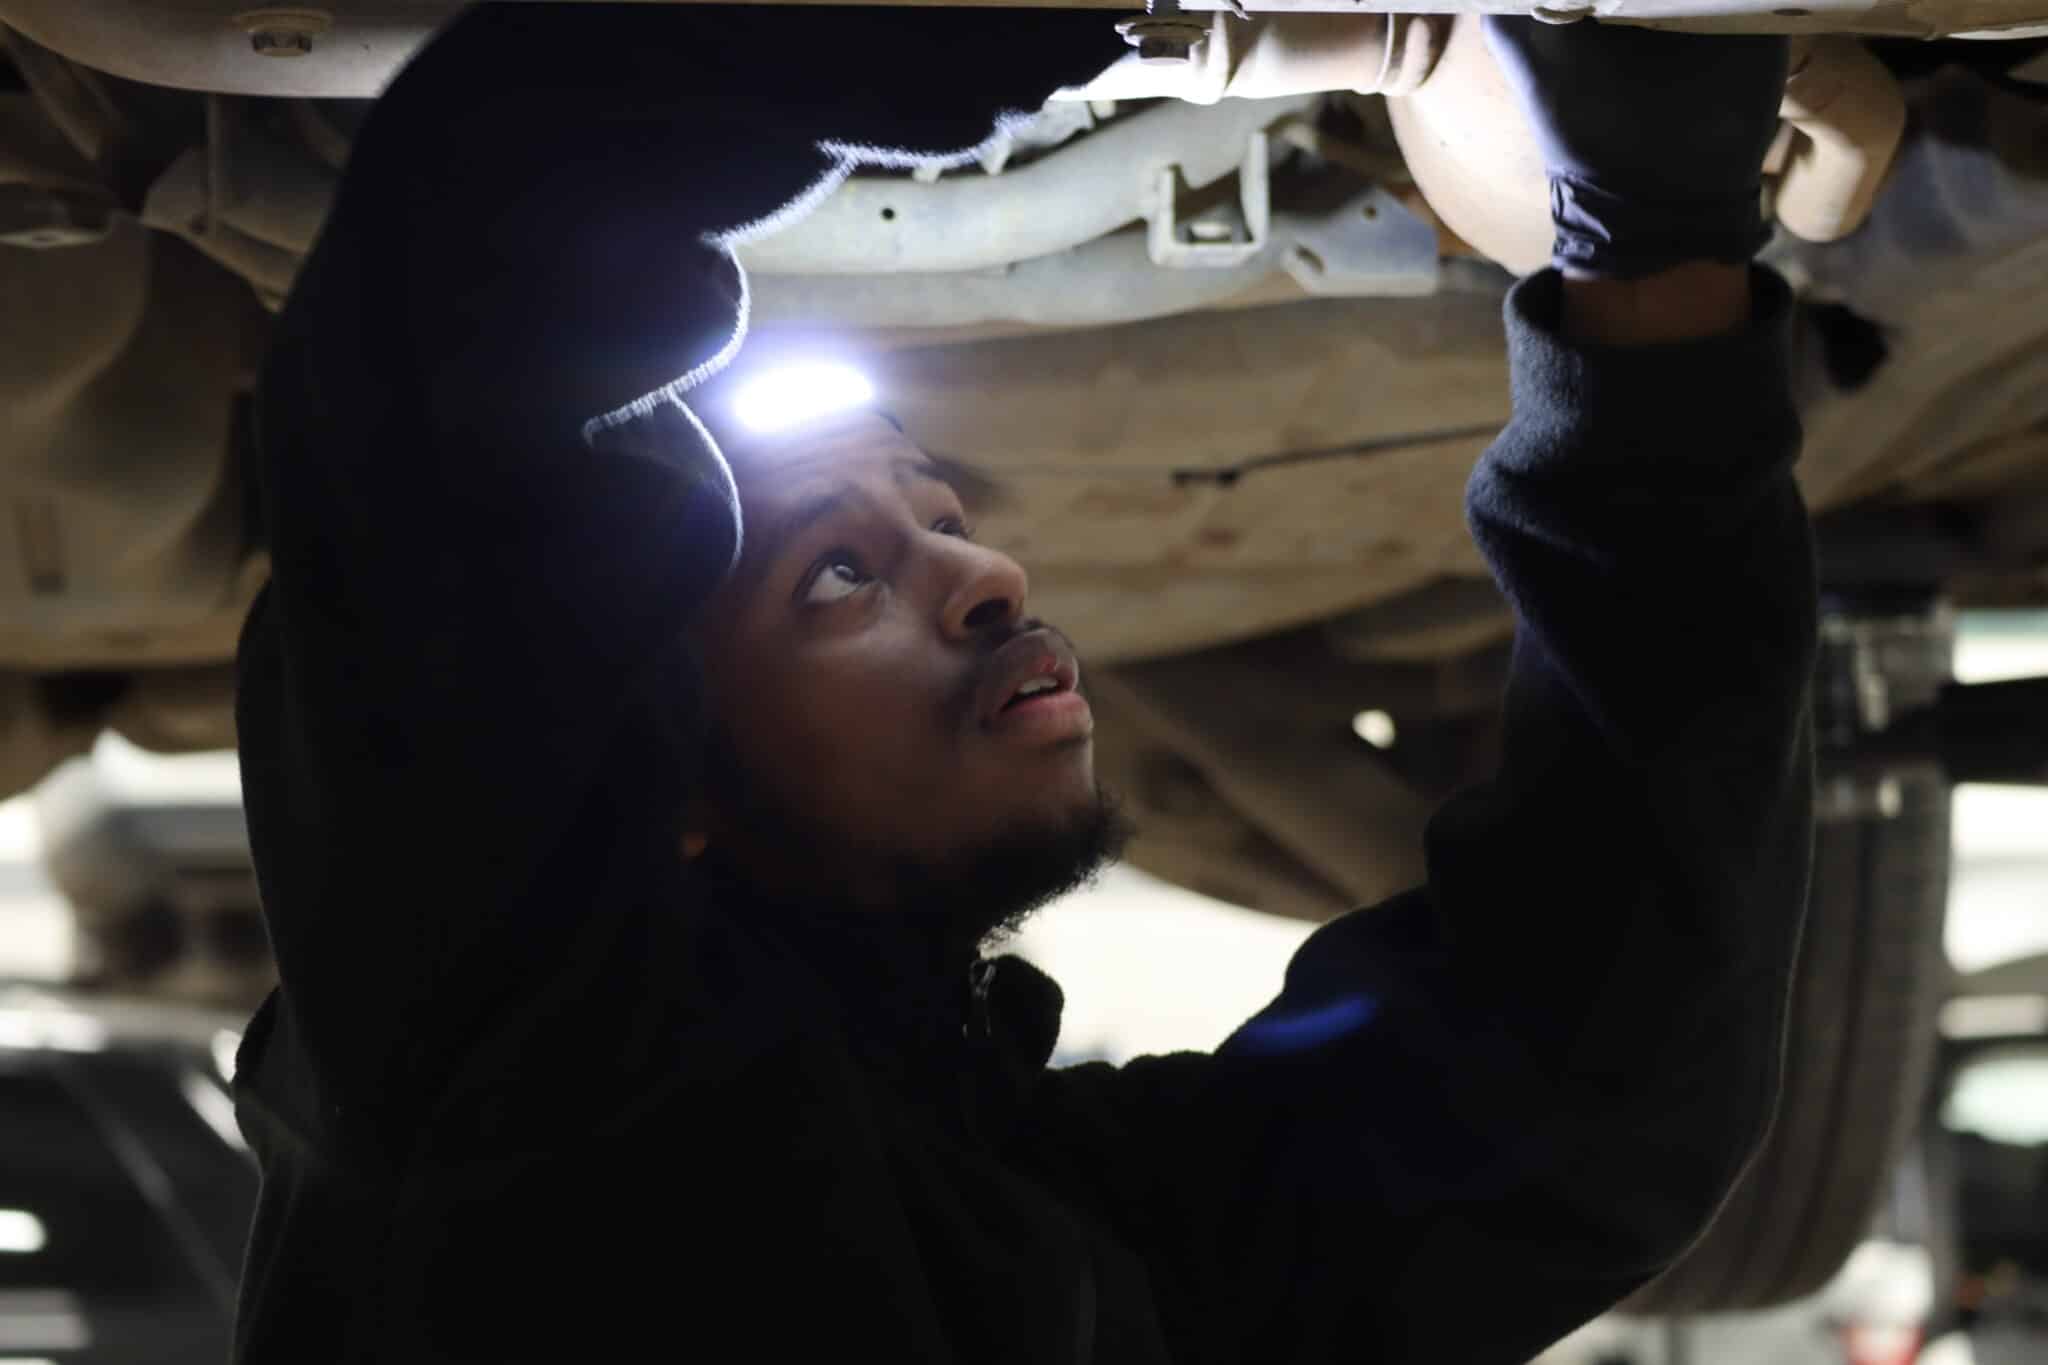 A newly qualified vehicle technician will quickly become a valuable resource